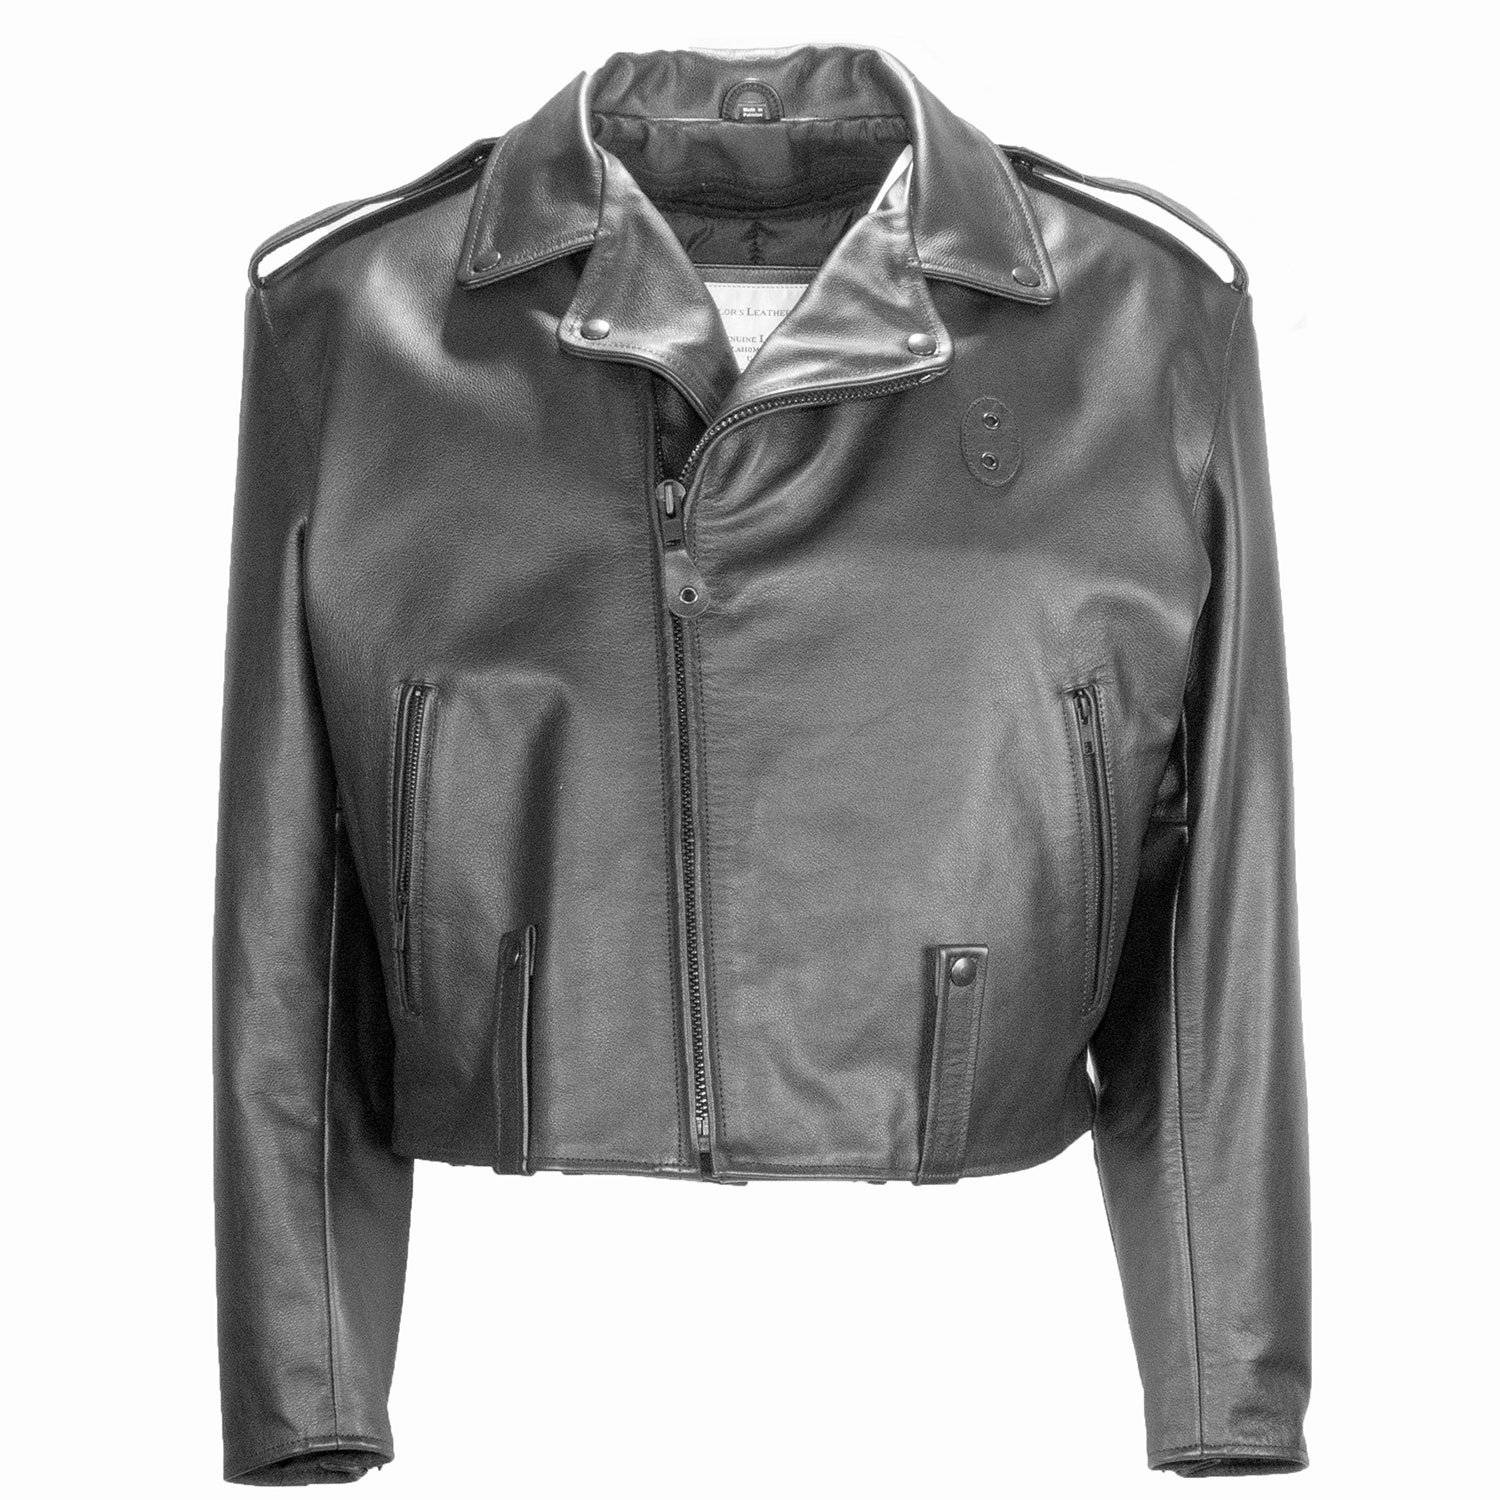 Taylors Leatherwear Pittsburgh Leather Jacket Zip-out Liner